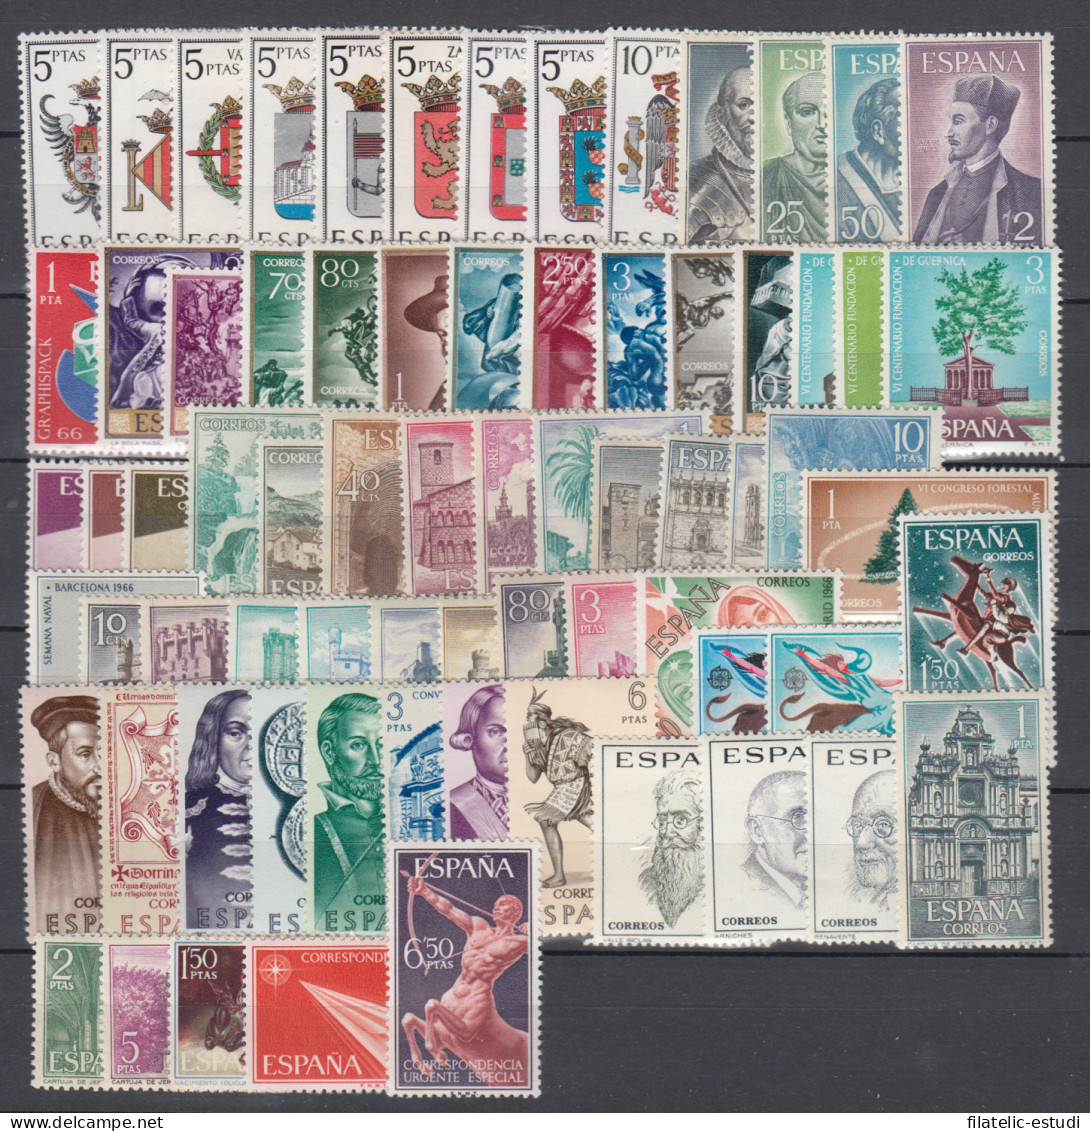 España Spain Año Completo Year Complete1966 MNH - Annate Complete